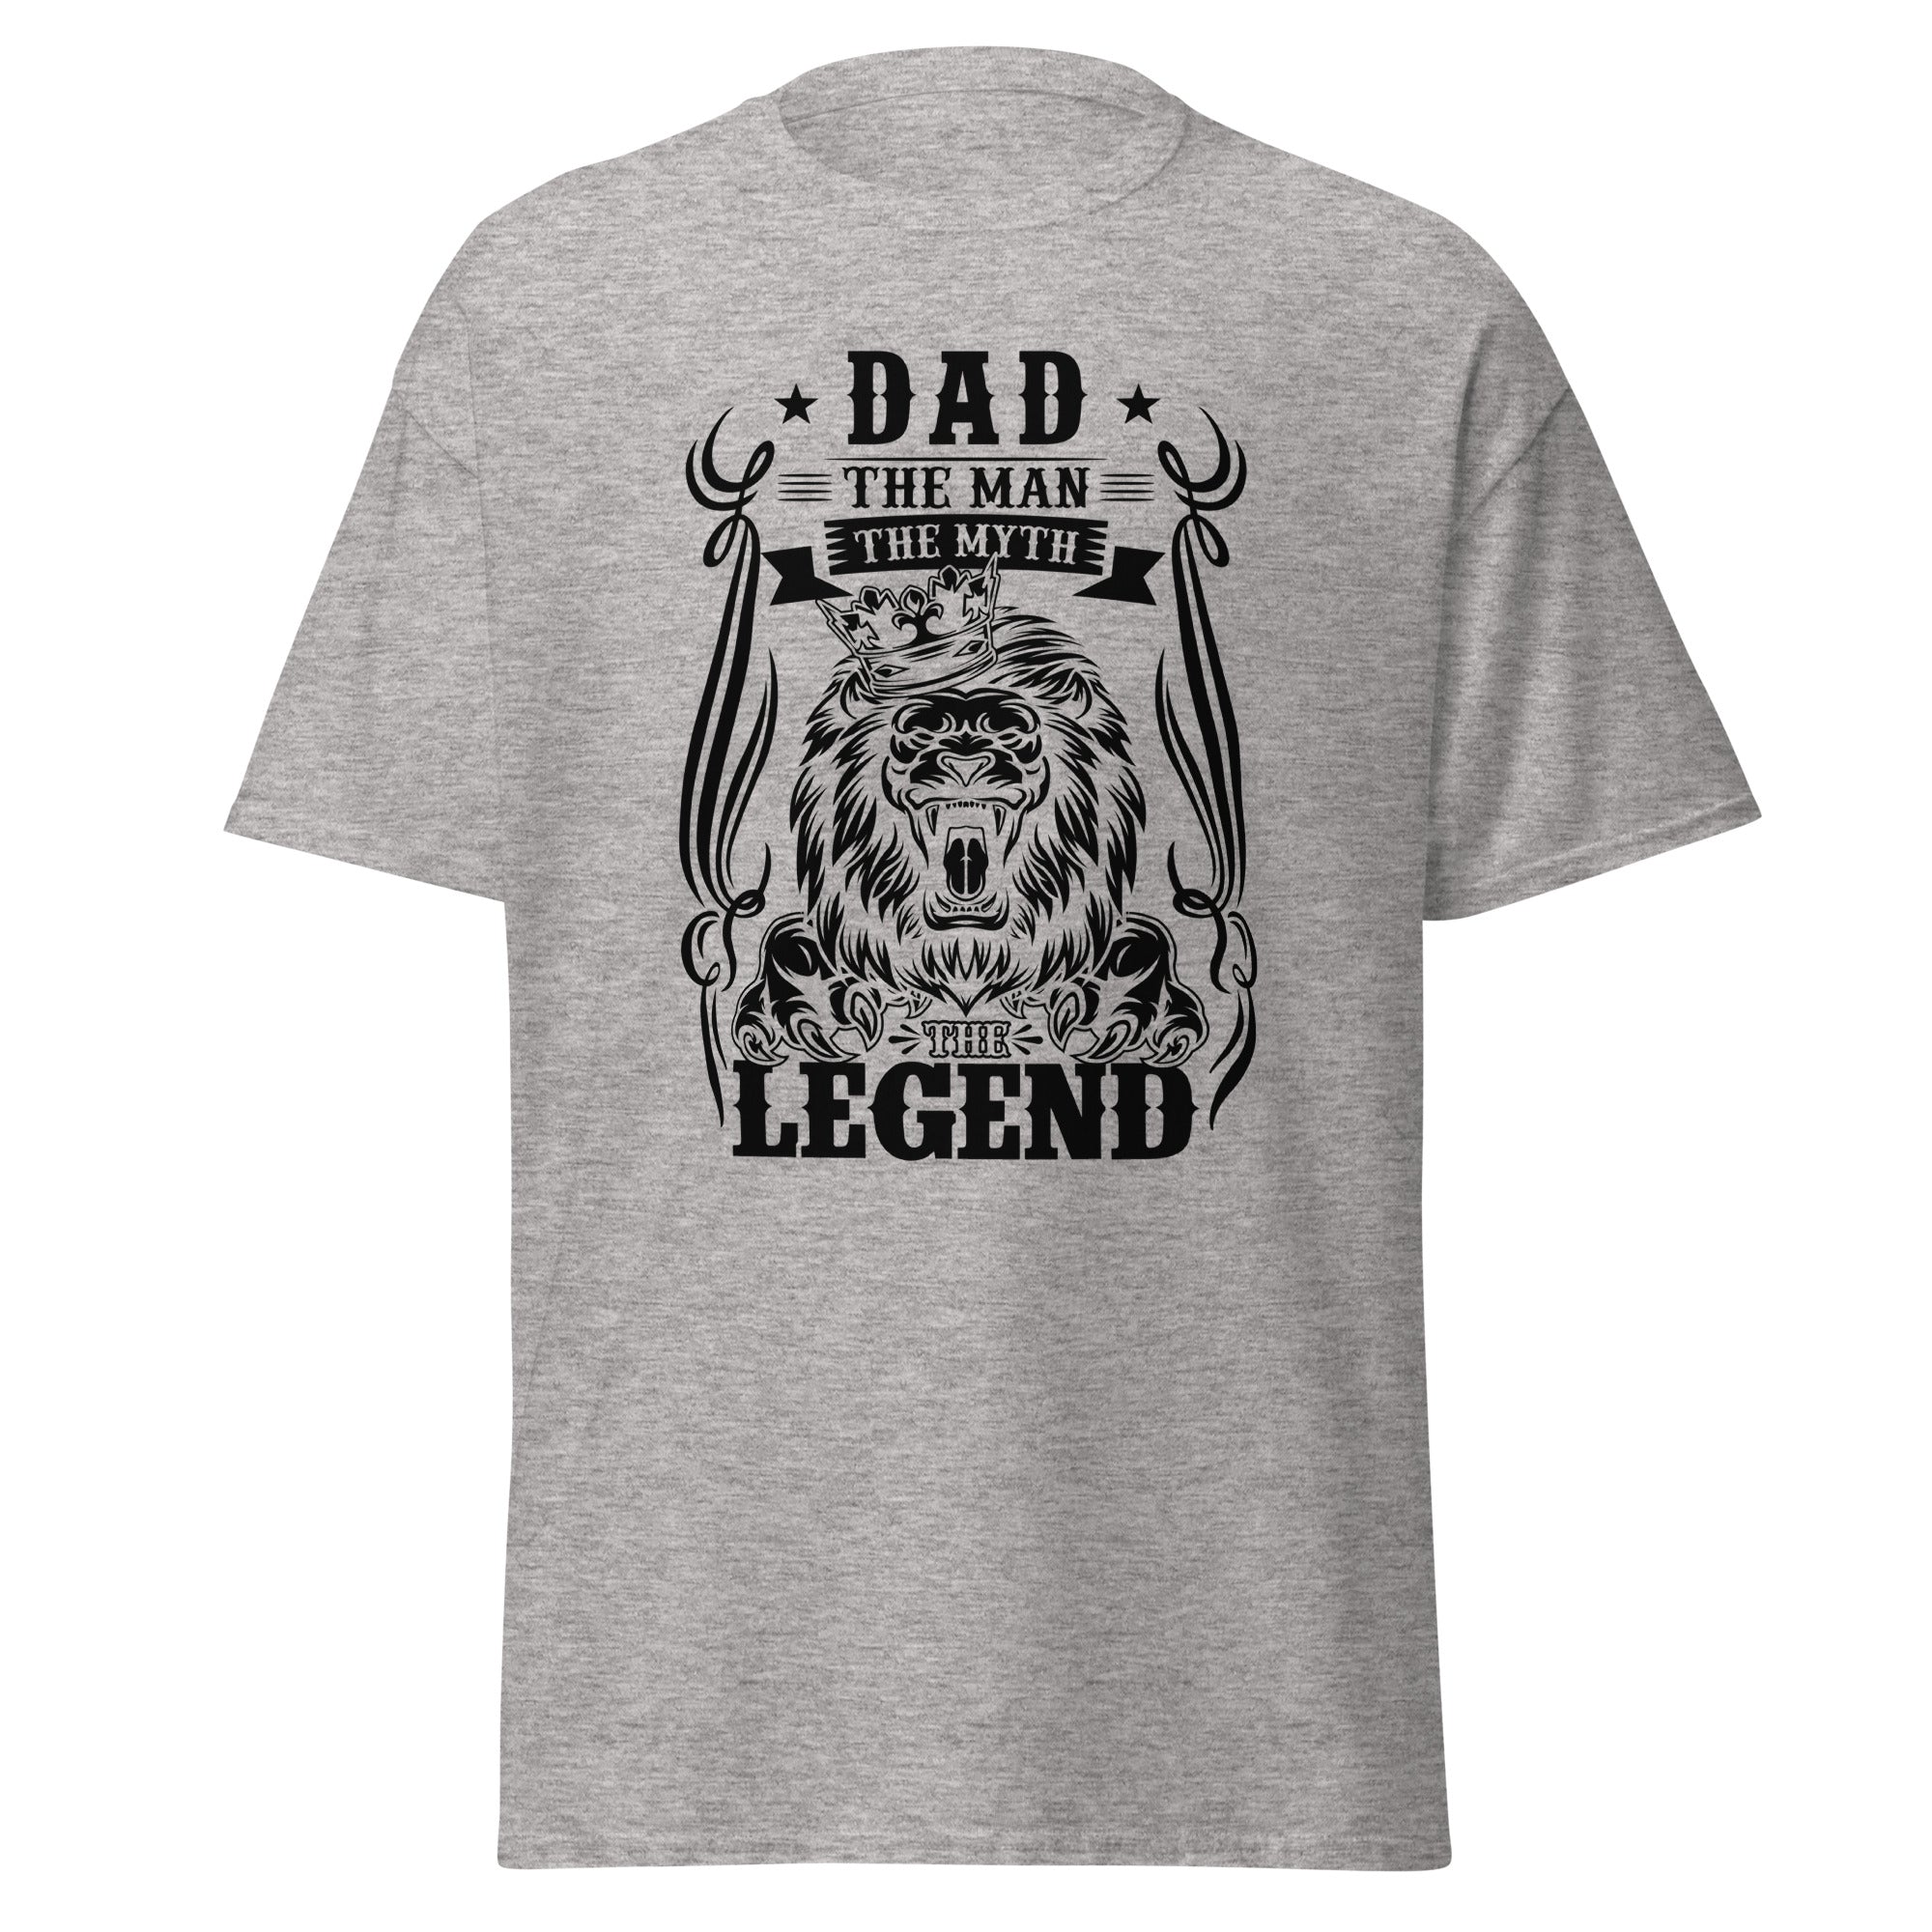 Dad The Man The Myth The Legend Classic Tee